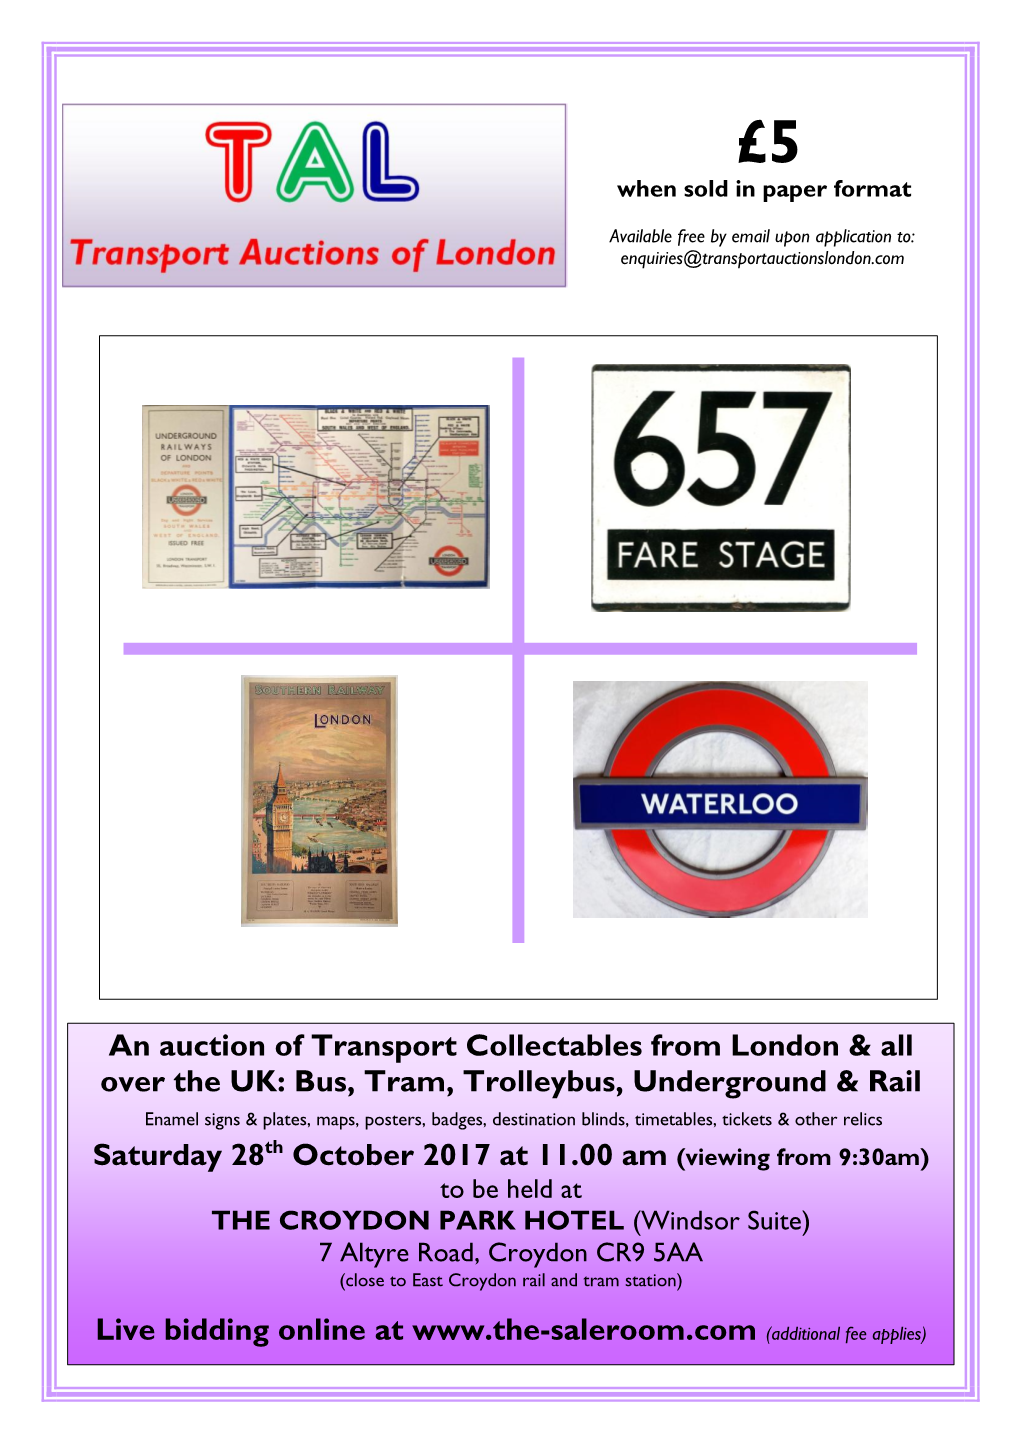 An Auction of Transport Collectables from London & All Over the UK